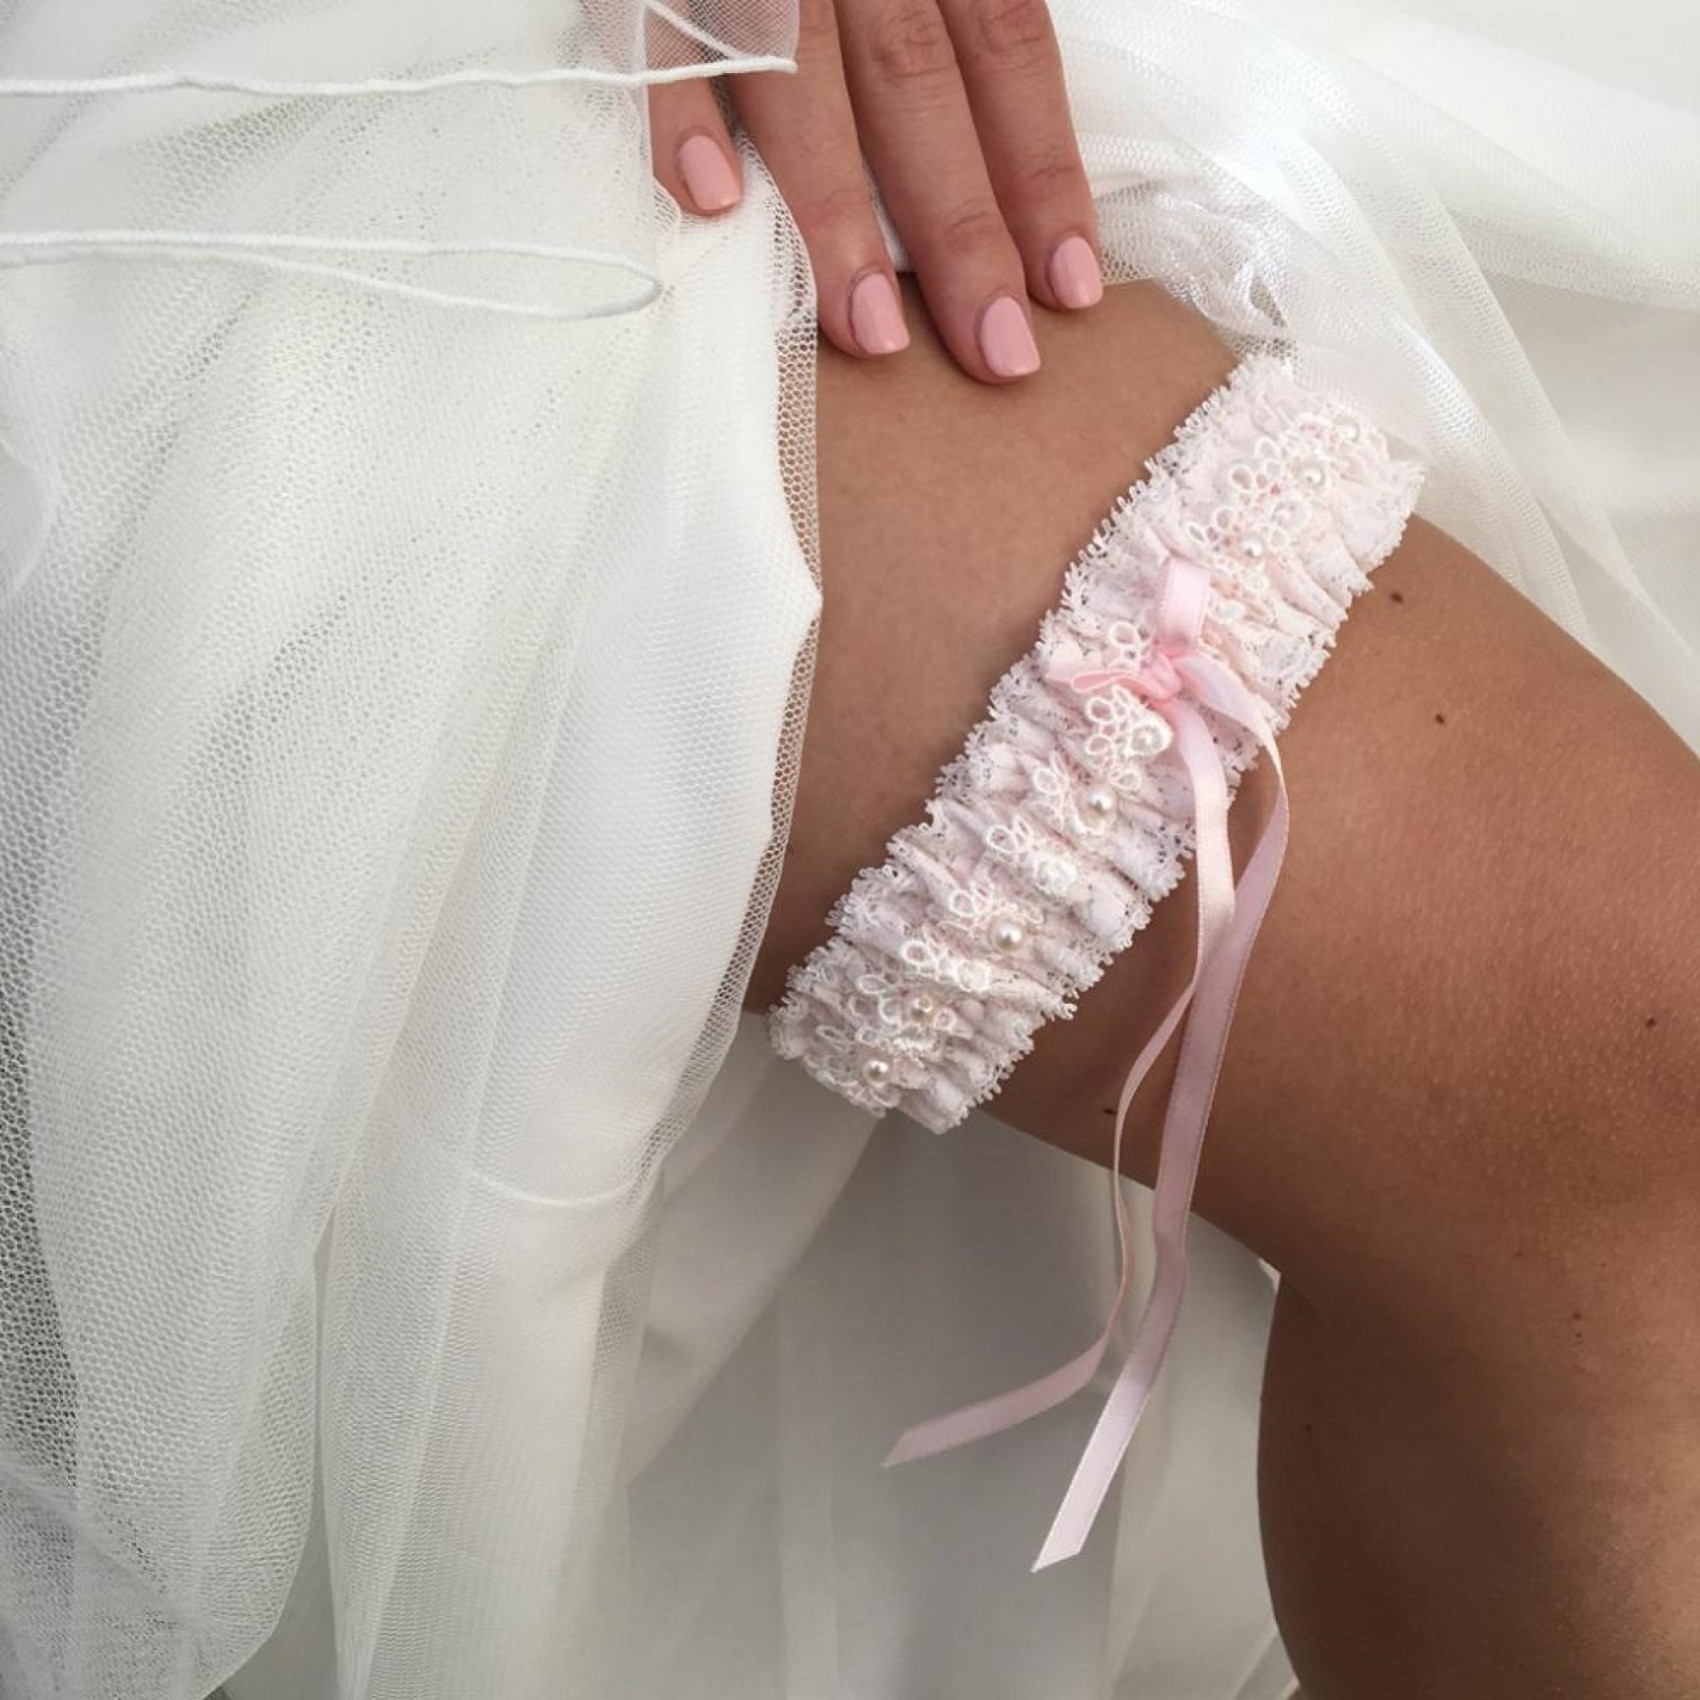 Cupid Pale Pink Lace Wedding Garter with Pearl Detail